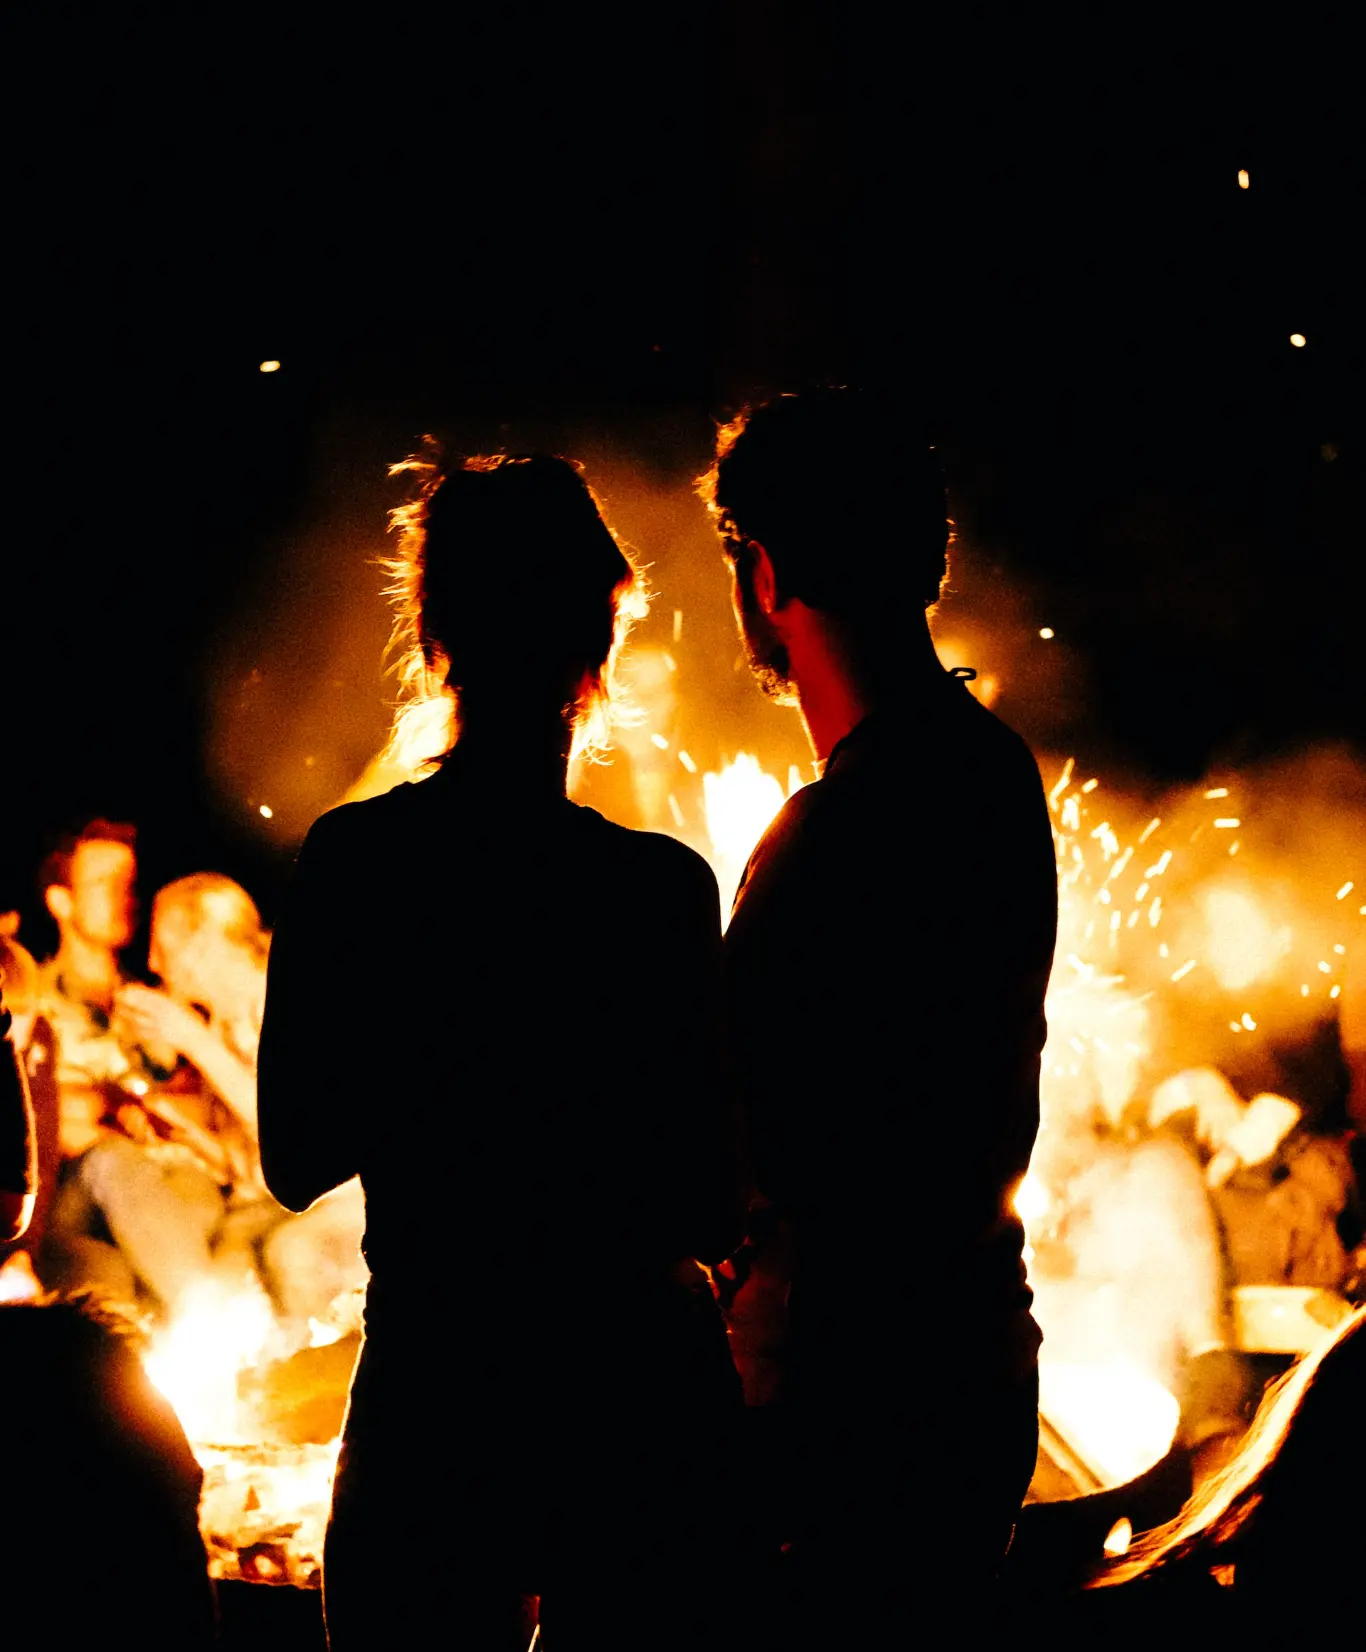 https://unsplash.com/photos/two-persons-standing-in-front-of-bonfire-xjS9YXVFTt4